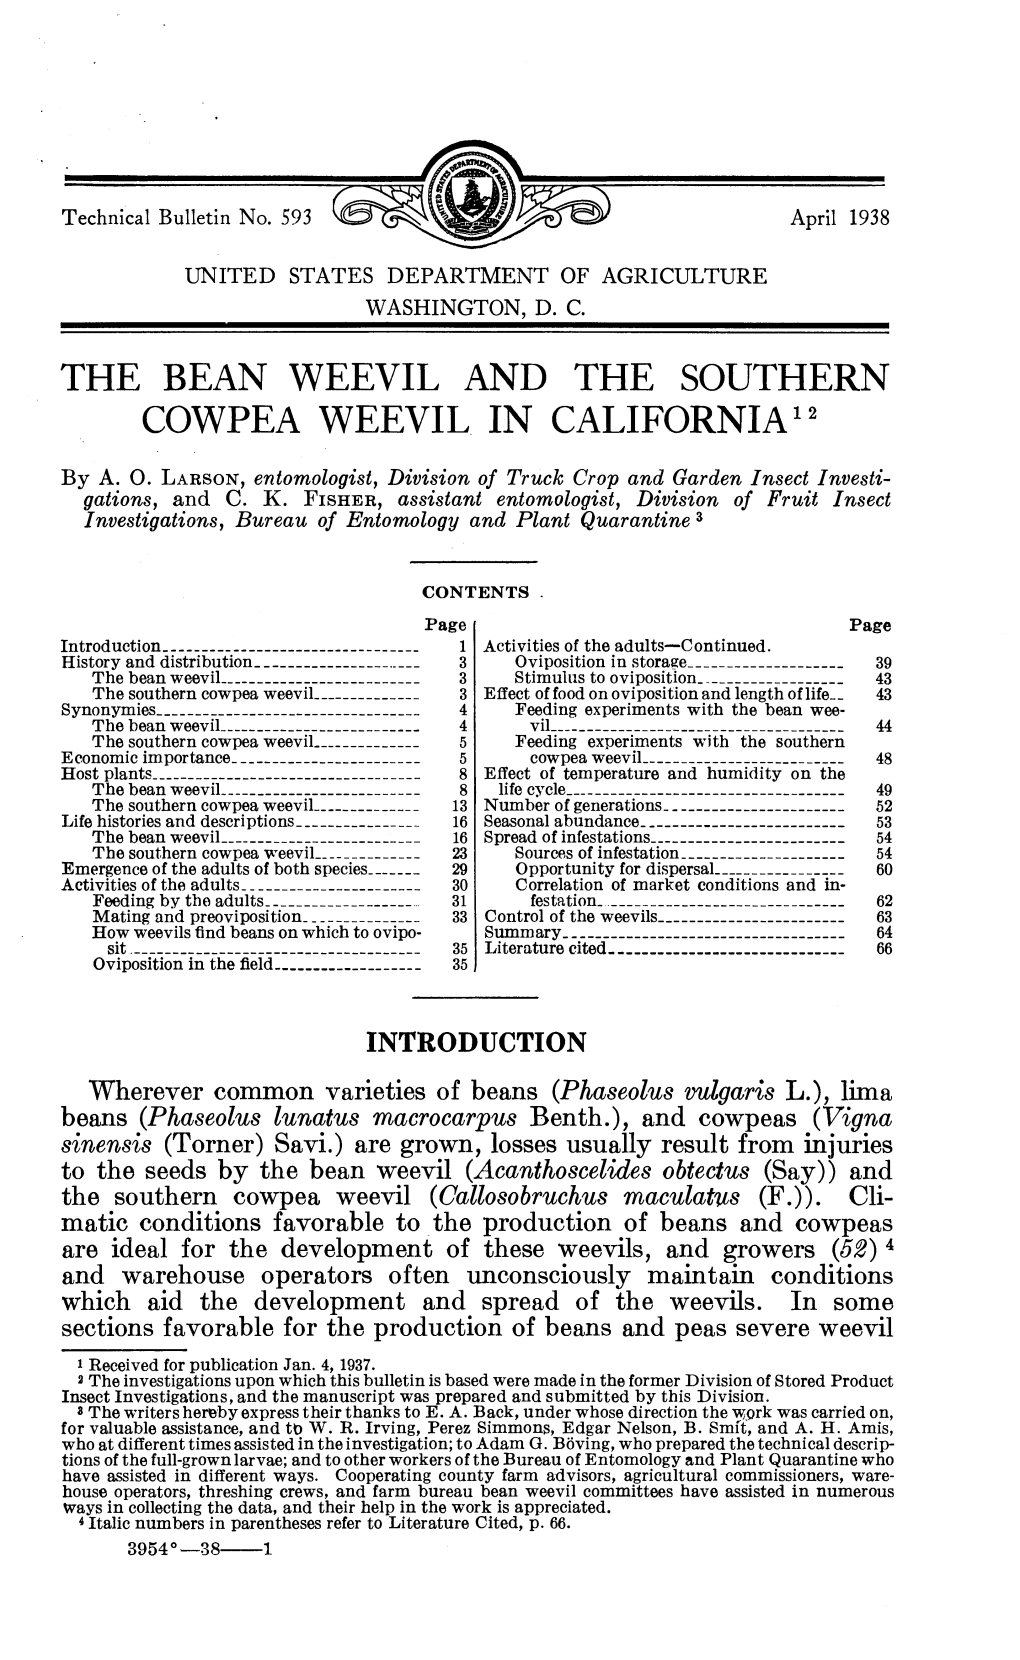 The Bean Weevil and the Southern Cowpea Weevil in Californias^